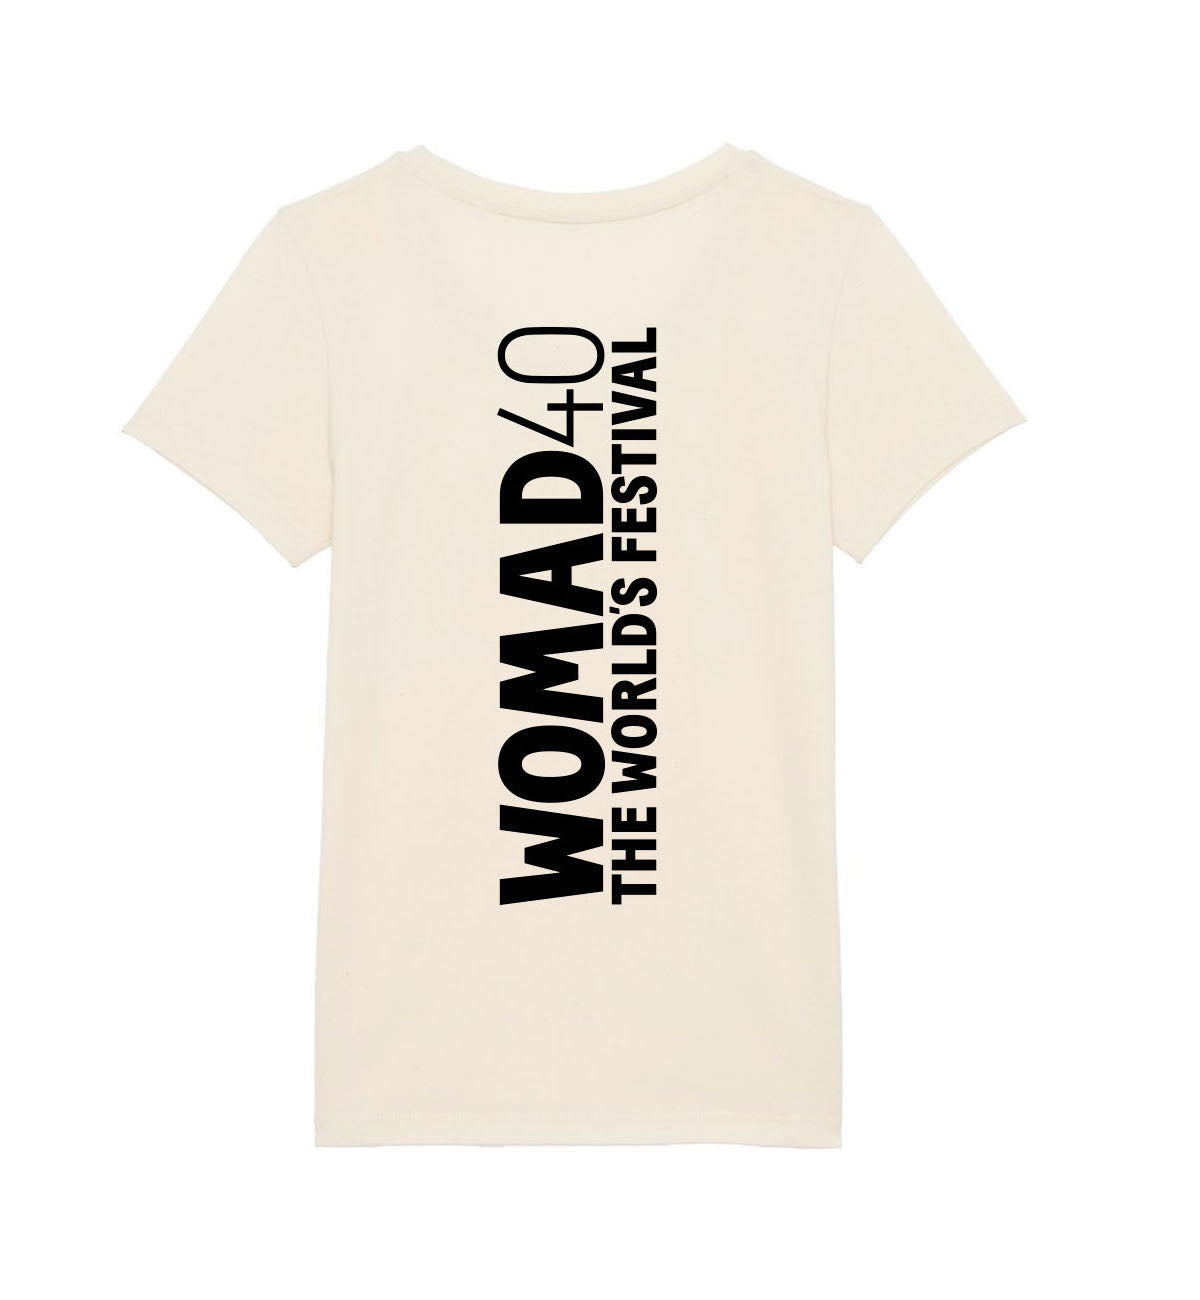 WOMAD Festival 2022 40th Anniversary Clothing